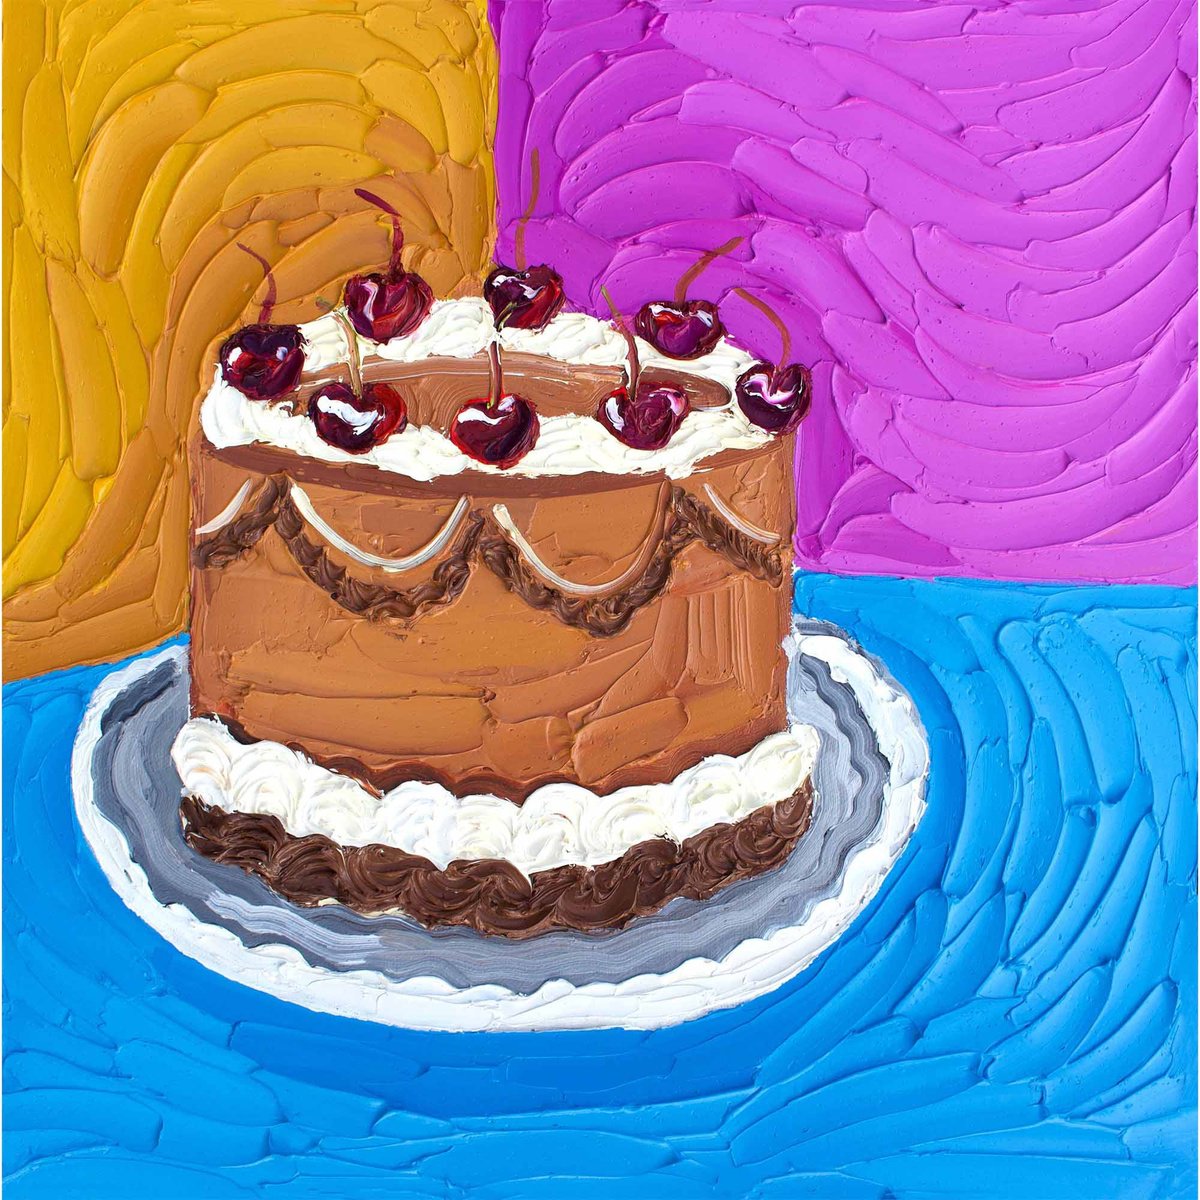 Chocolate Cake with Cherries on Top Original Painting by Alice Straker